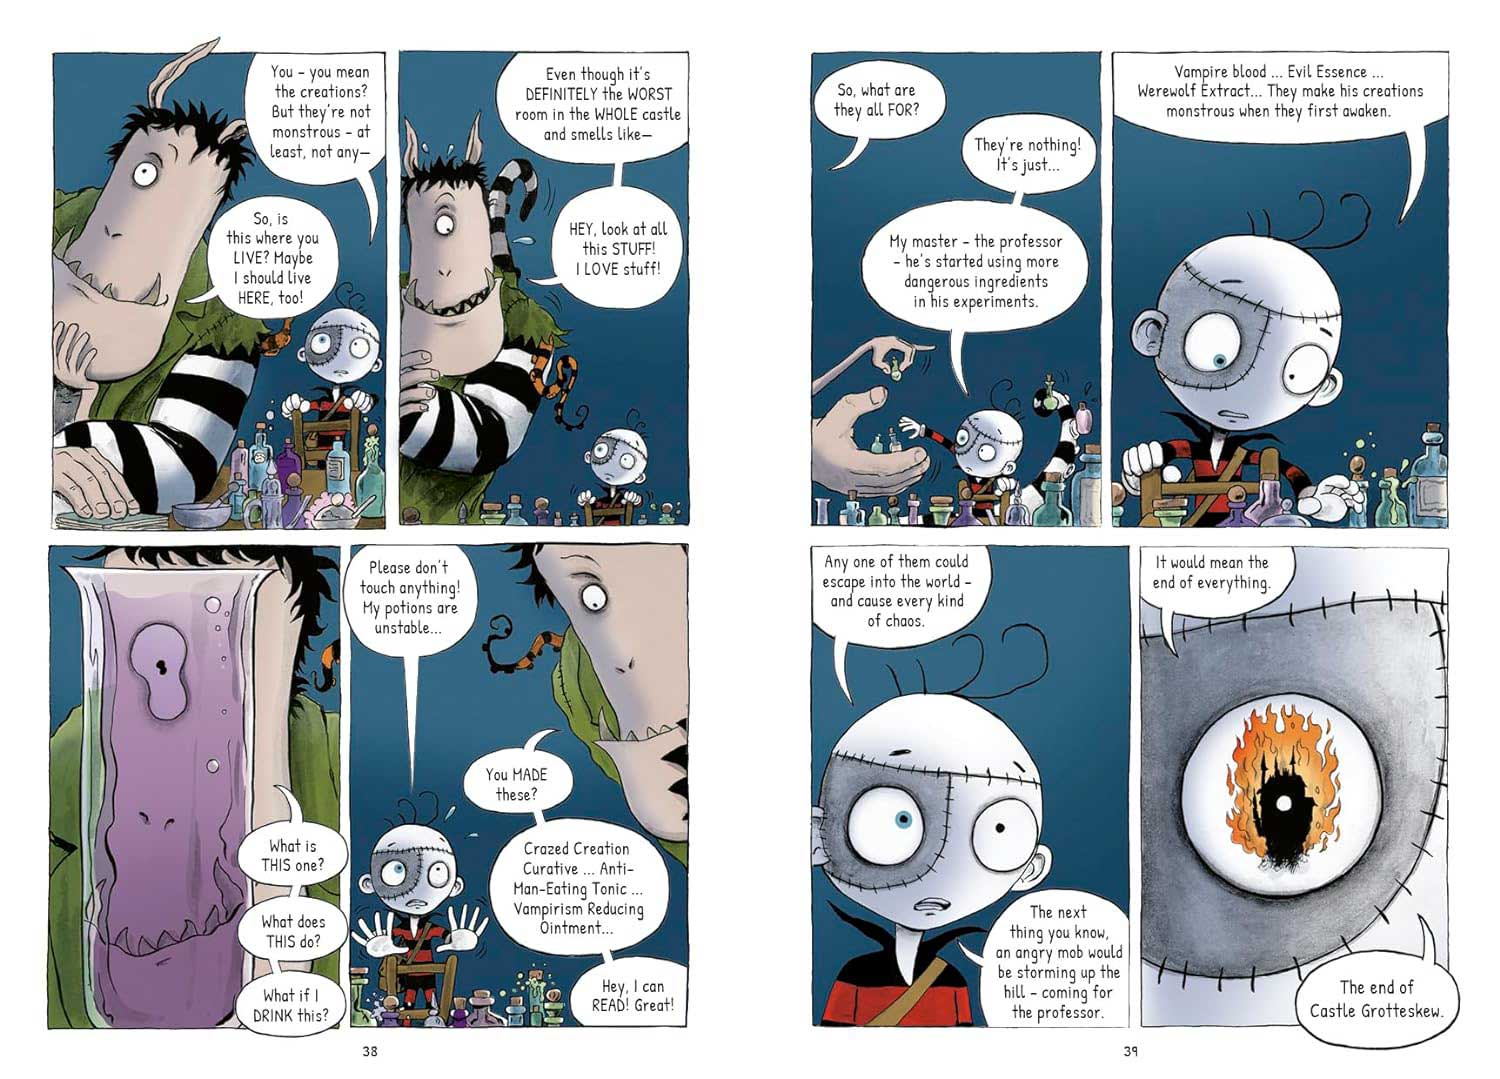 Stich Head the Graphic Novel by Guy Bass and Pete Williamson spread 3